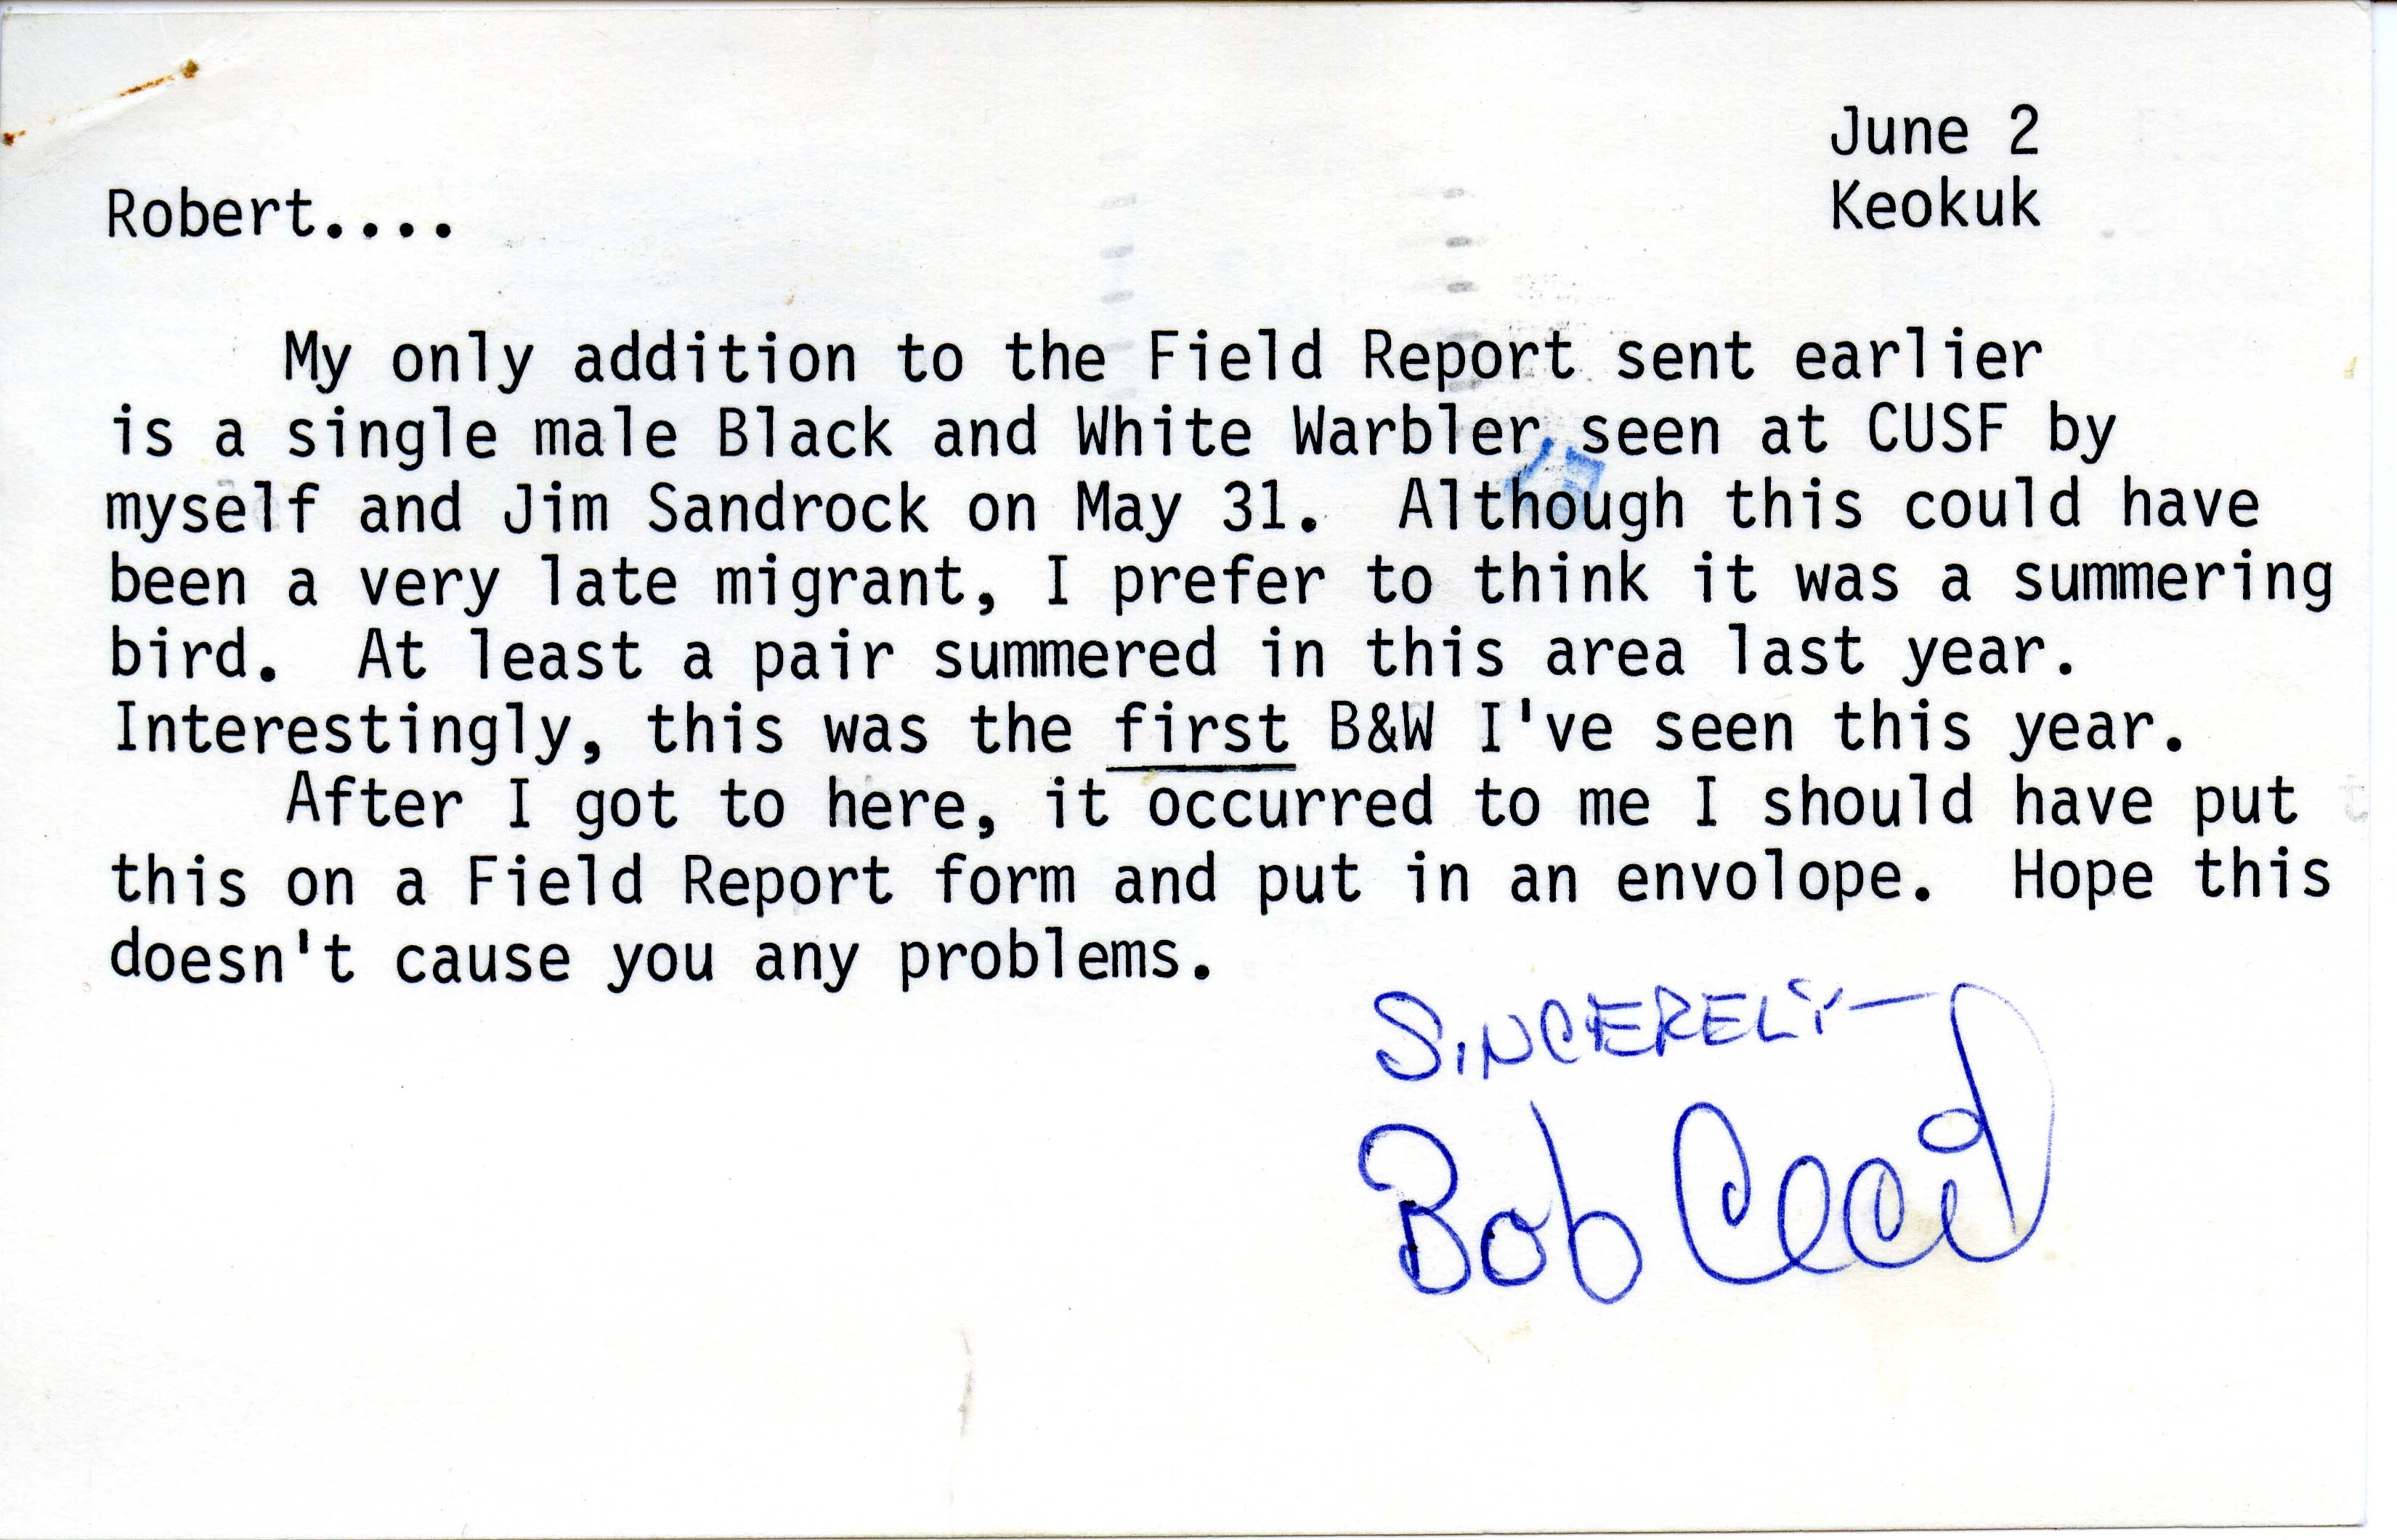 Robert Cecil letter to Robert Myers regarding Black and White Warbler sighting, June 2, 1986